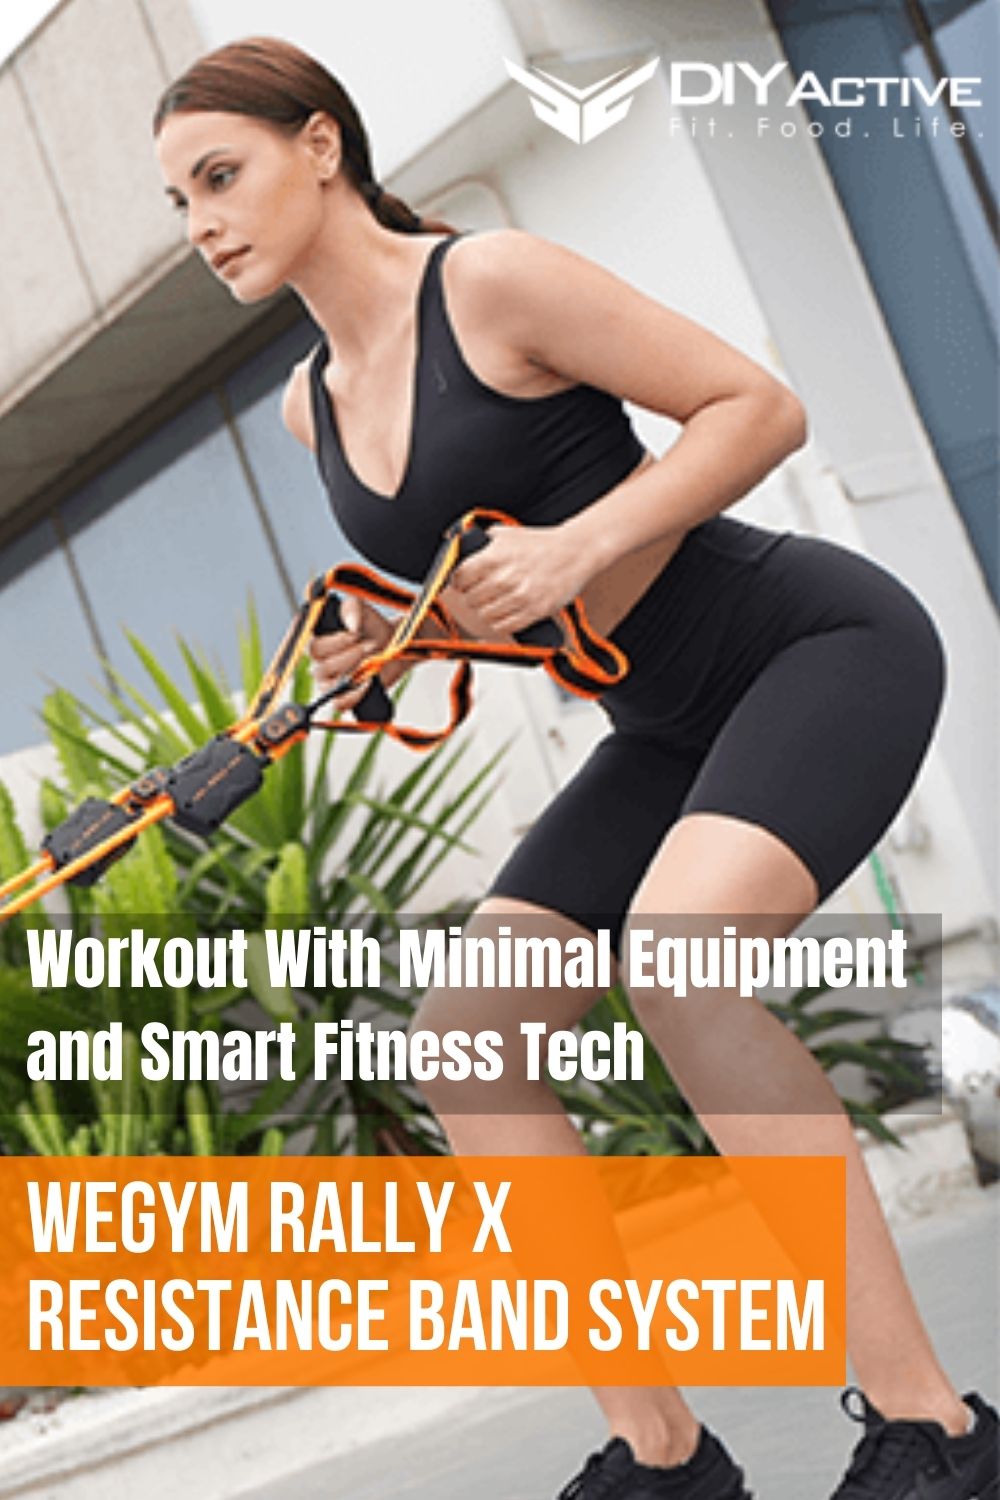 Revolutionize Your Home Workout With Minimal Equipment and Smart Fitness Tech 4